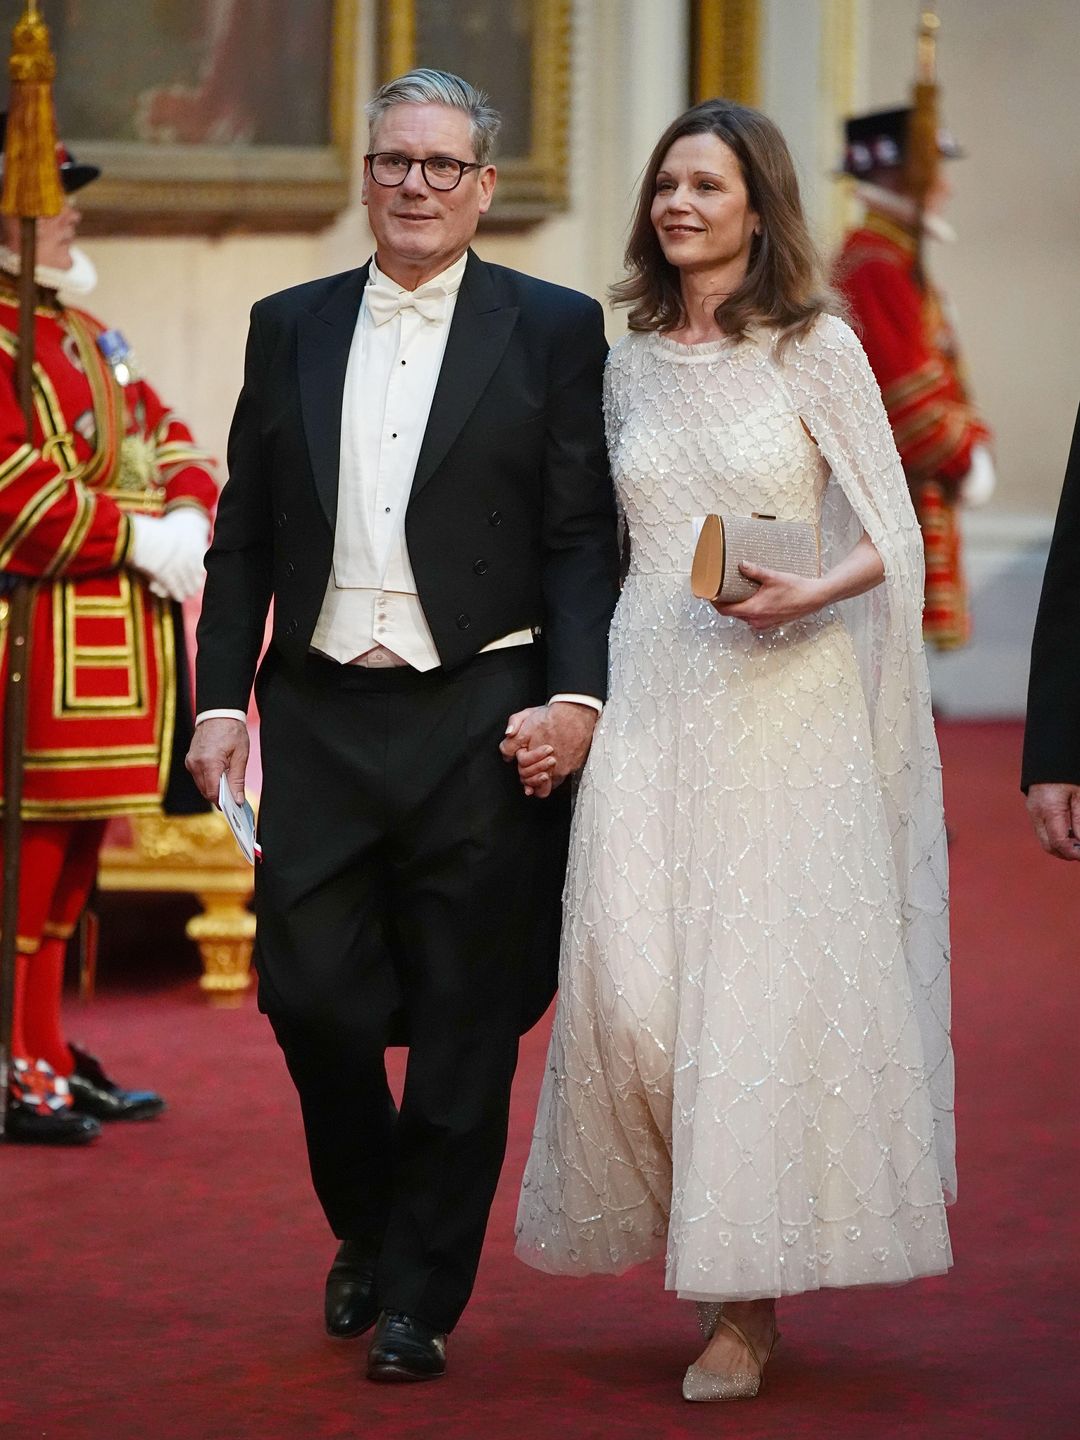 Keir Starmer and his wife Victoria walking around Buckingham Palace